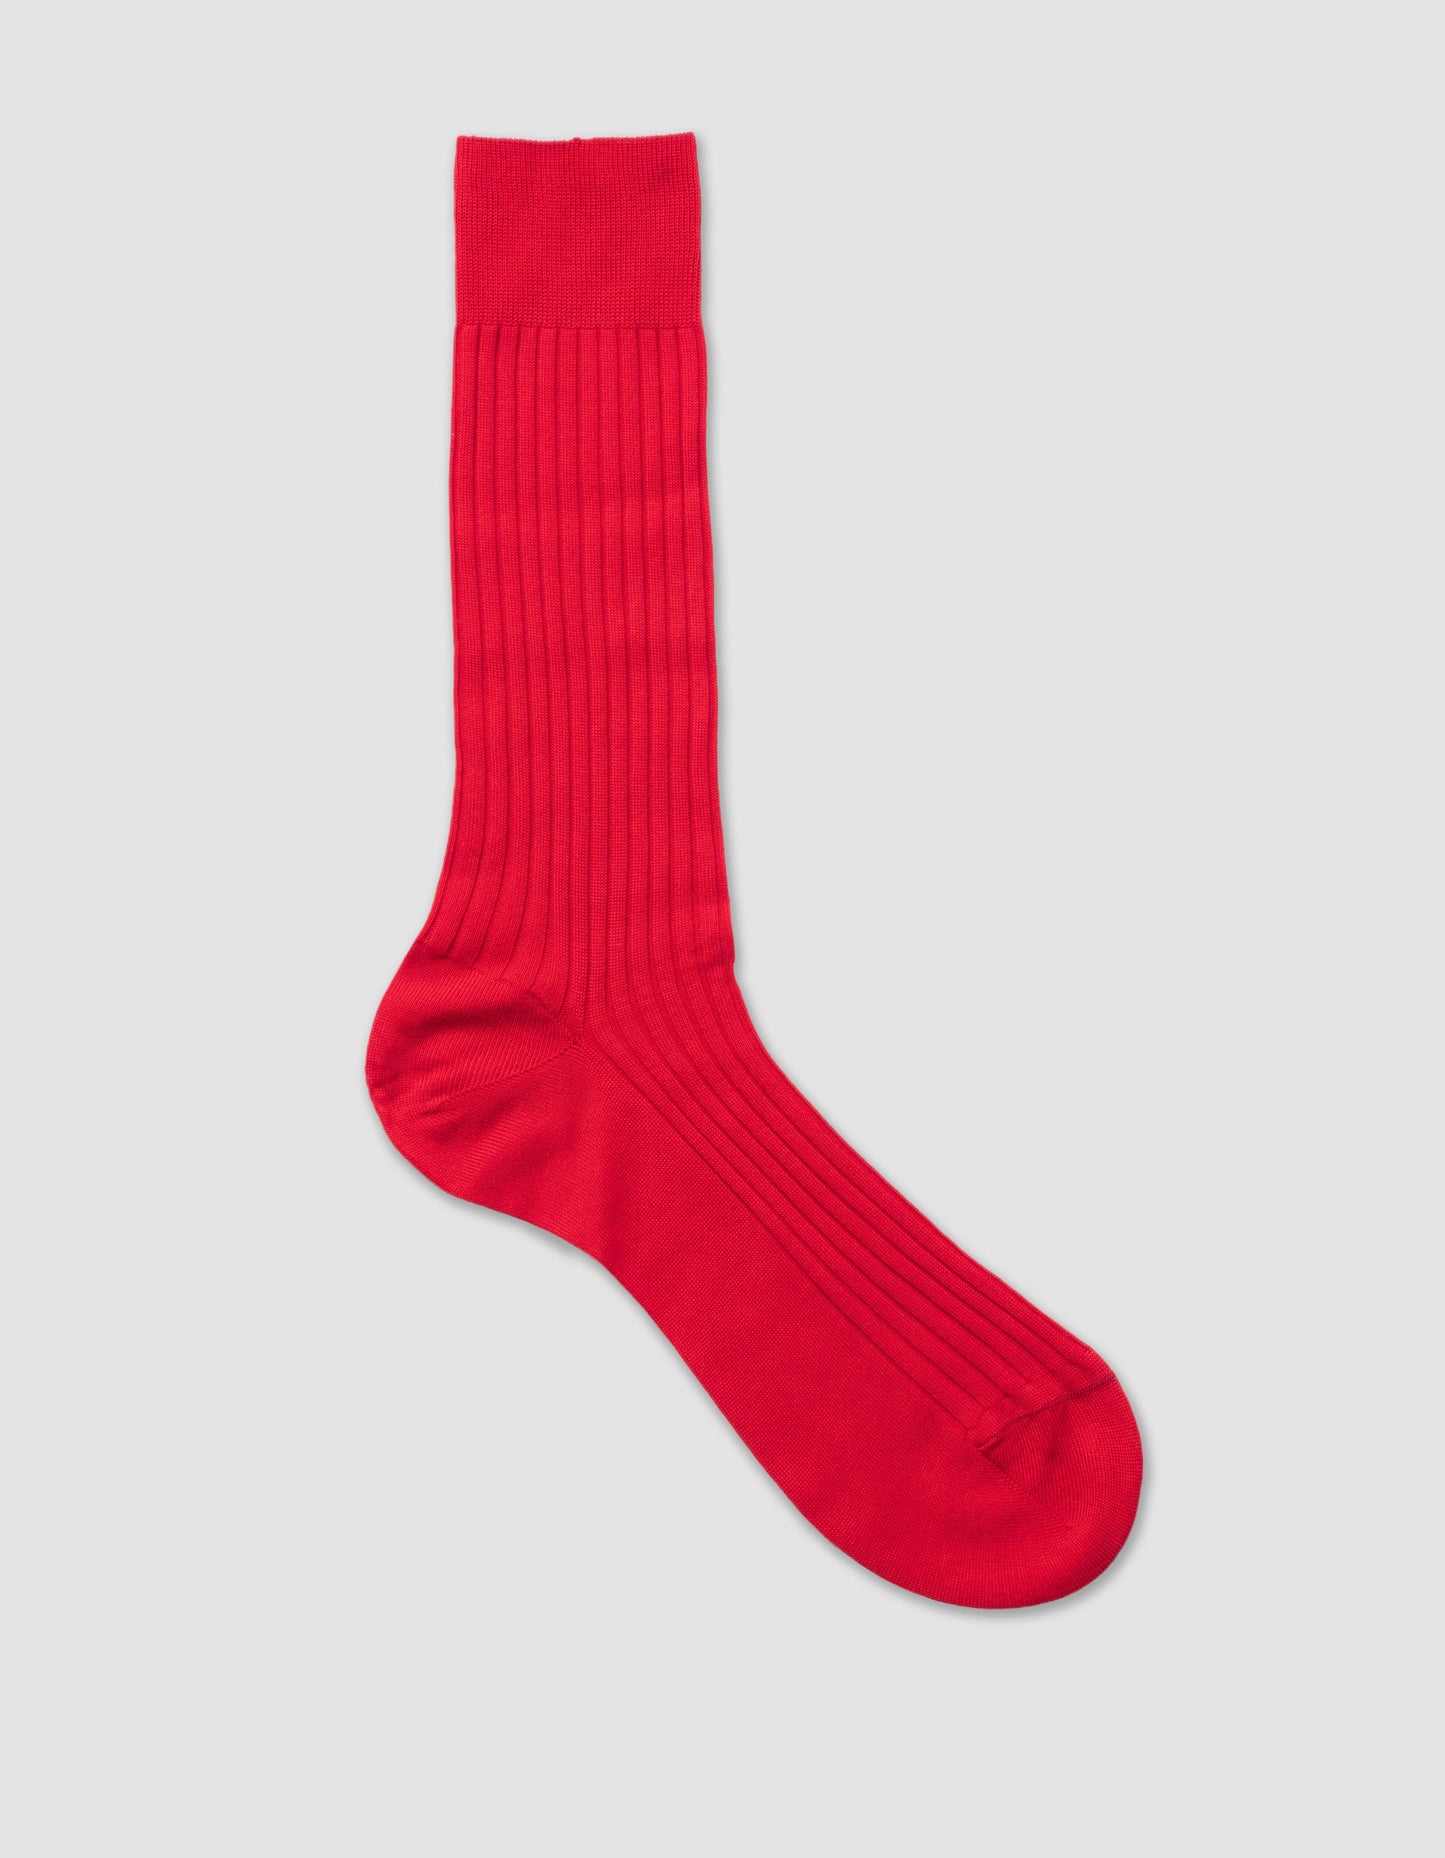 SOLID COTTON SOCKS - RED